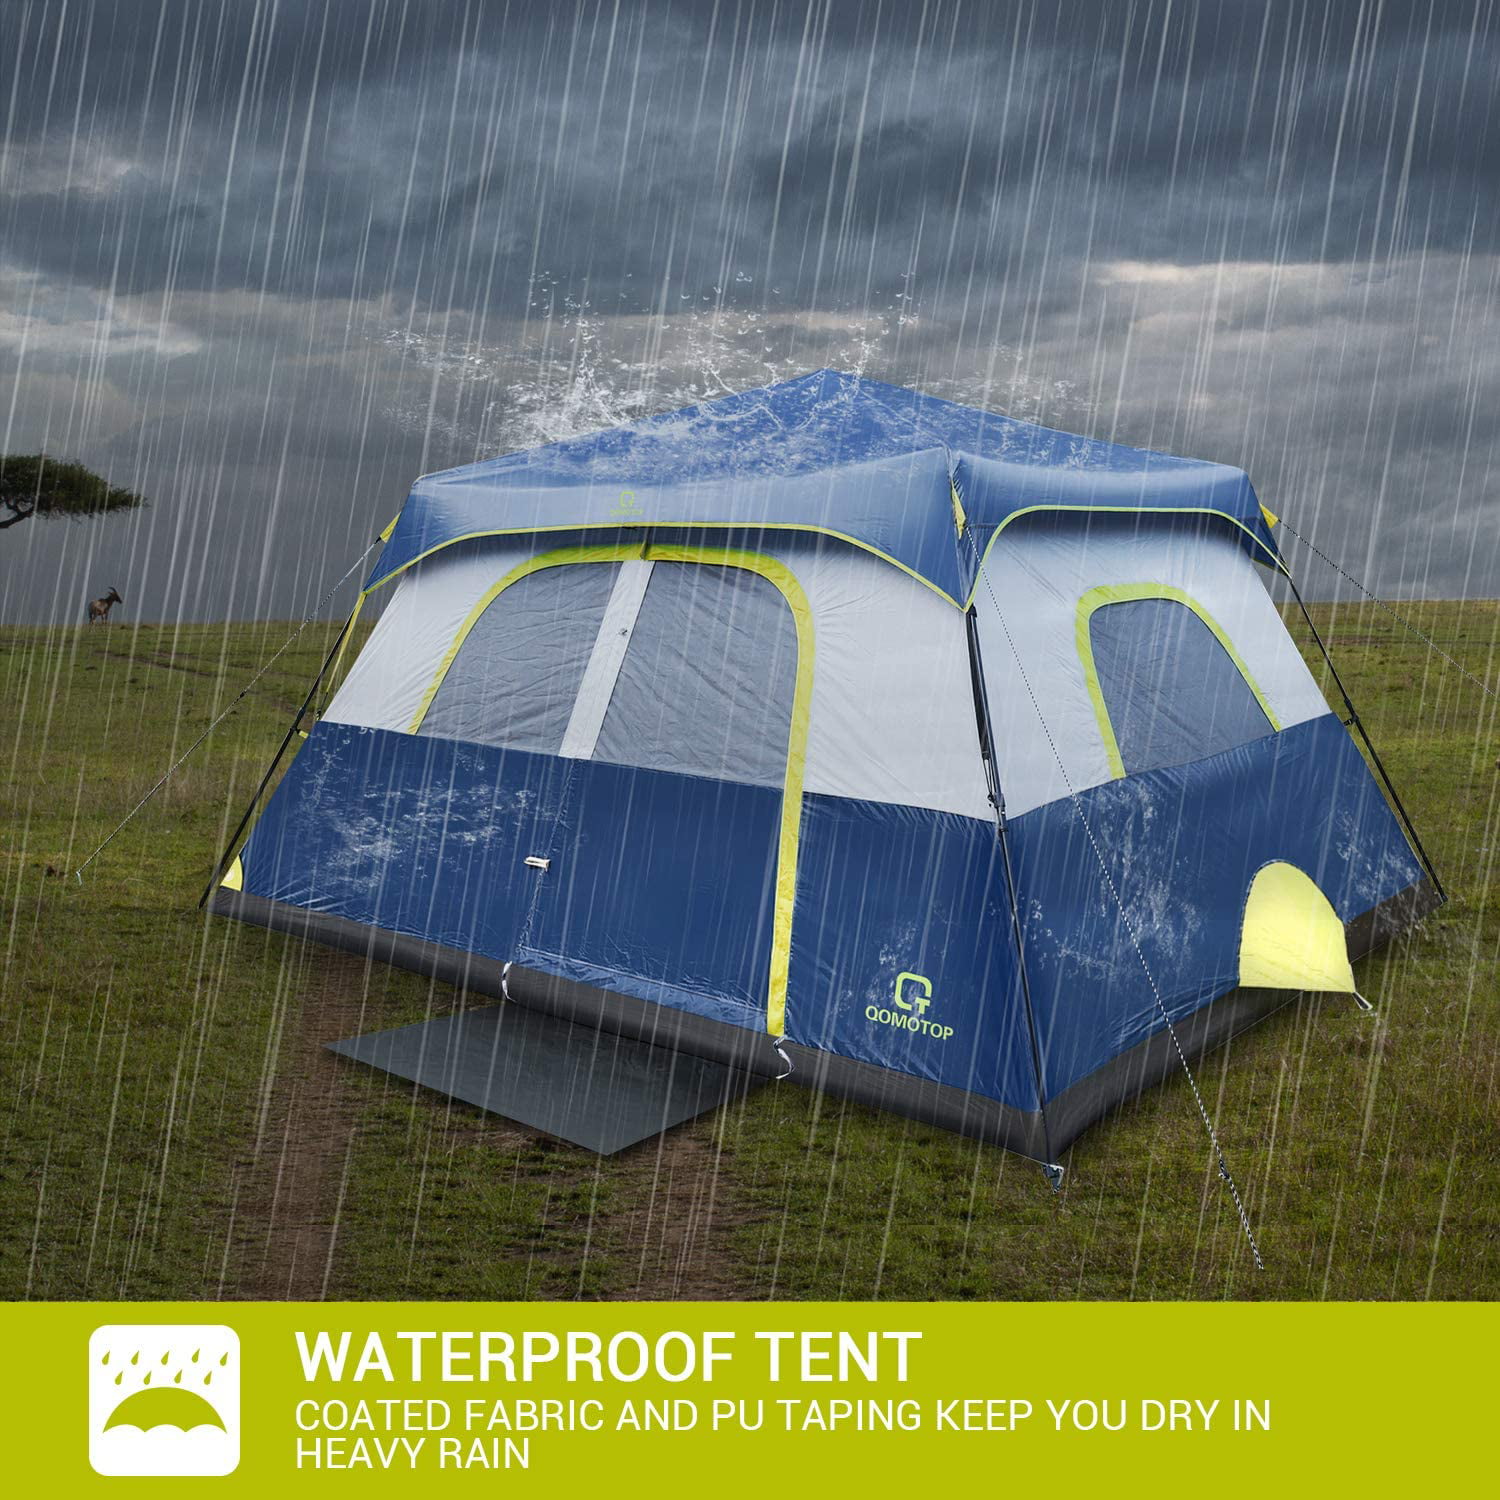 Portable Instant Tent 9 Person Family Camping Tent Waterproof and Windproof Pop-Up Tent with Top Rainfly Provide Mud Mat Advanced Venting Design OT QOMOTOP Tents